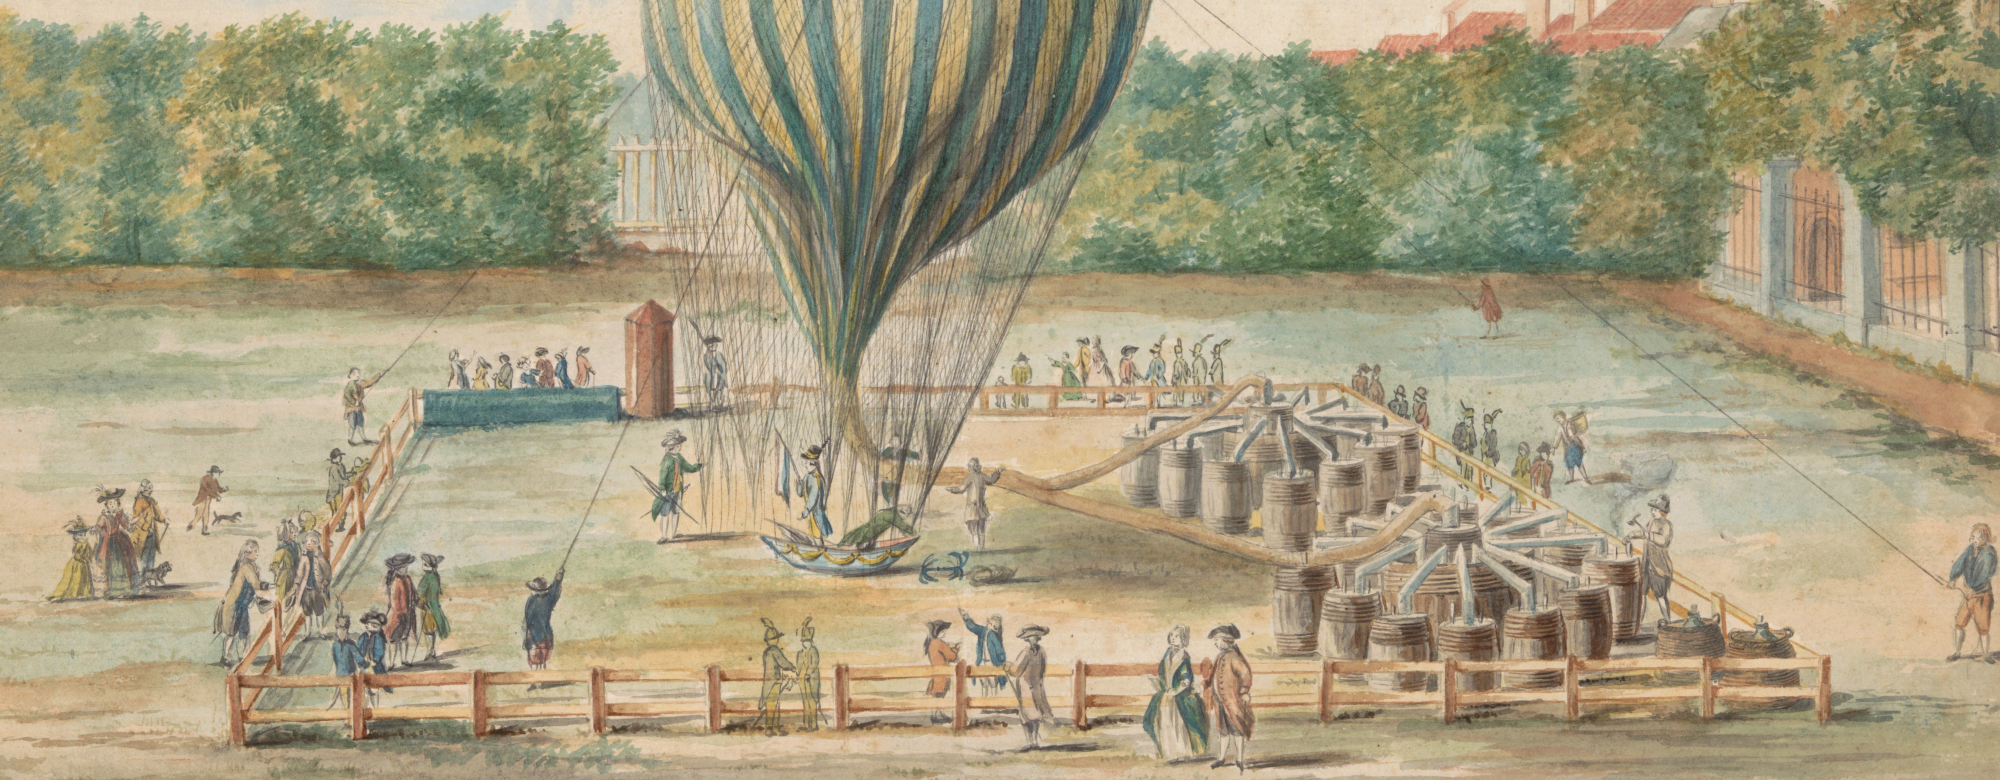 The Launch of Blanchard's Balloon at The Hague in 1785 by G. Carbentus (cropped)